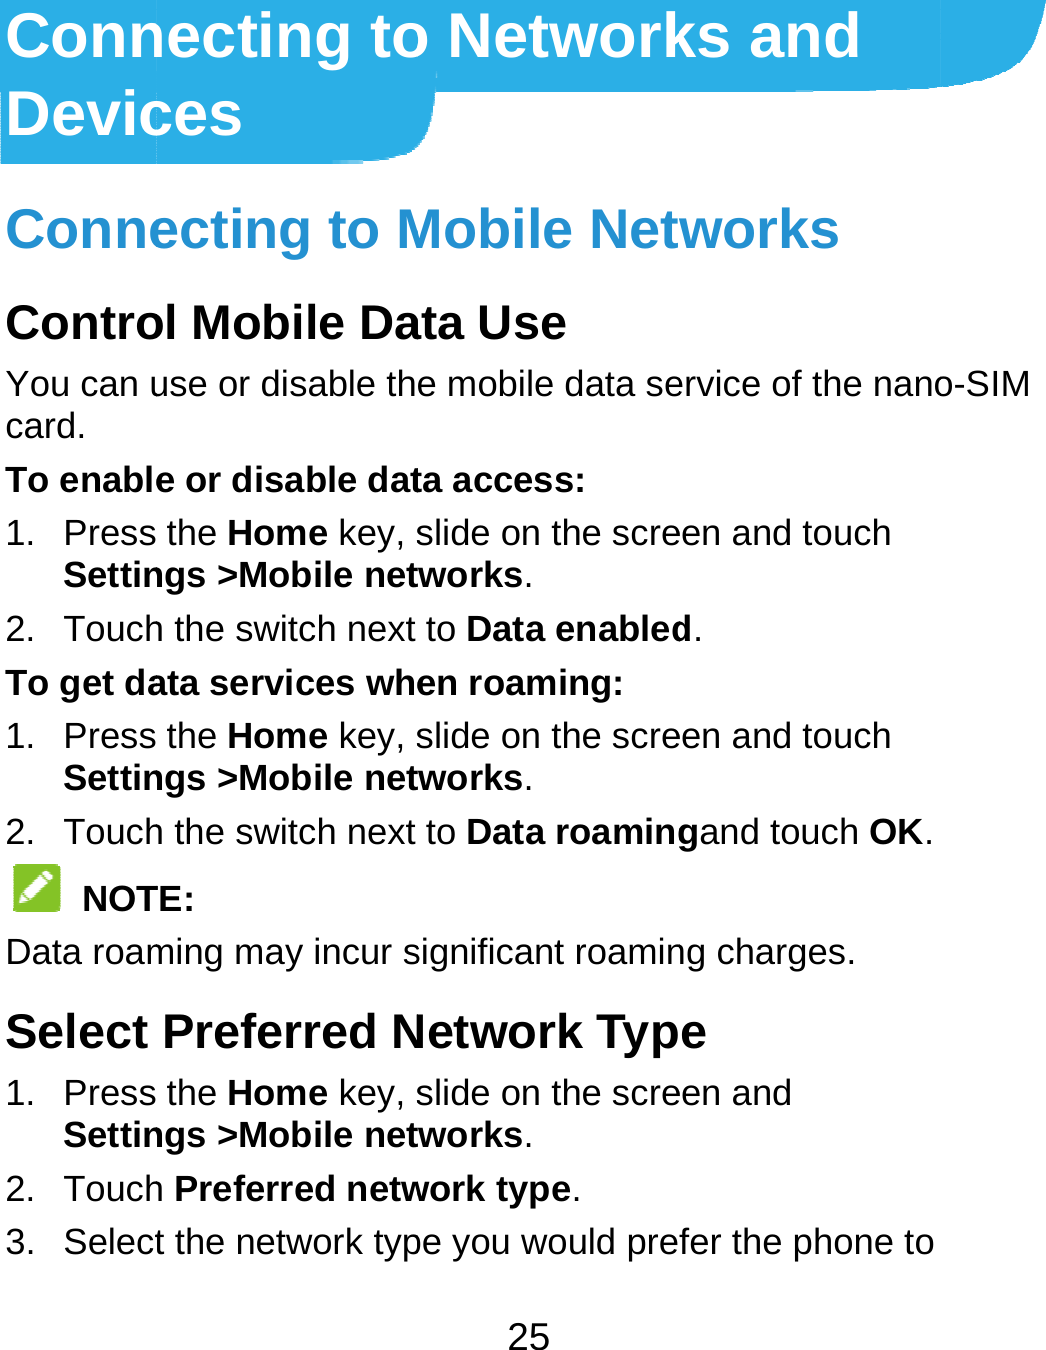  ConnDevicConneControYou can ucard. To enable1. PressSettin2. TouchTo get da1. PressSettin2. Touch NOTData roamSelect 1. PressSettin2. Touch3. Selectnecting toces ecting to Mol Mobile Dause or disable the or disable dat the Home key, sngs &gt;Mobile neth the switch next ata services whe the Home key, sngs &gt;Mobile neth the switch next TE: ming may incur sPreferred N the Home key, sngs &gt;Mobile neth Preferred netwt the network typ25 o NetworkMobile Netata Use e mobile data seta access: slide on the scretworks. to Data enableden roaming: slide on the scretworks. to Data roamingsignificant roaminNetwork Typslide on the scretworks. work type. pe you would preks and works ervice of the nanoeen and touch d. een and touch gand touch OK.ng charges. e een and fer the phone to o-SIM 